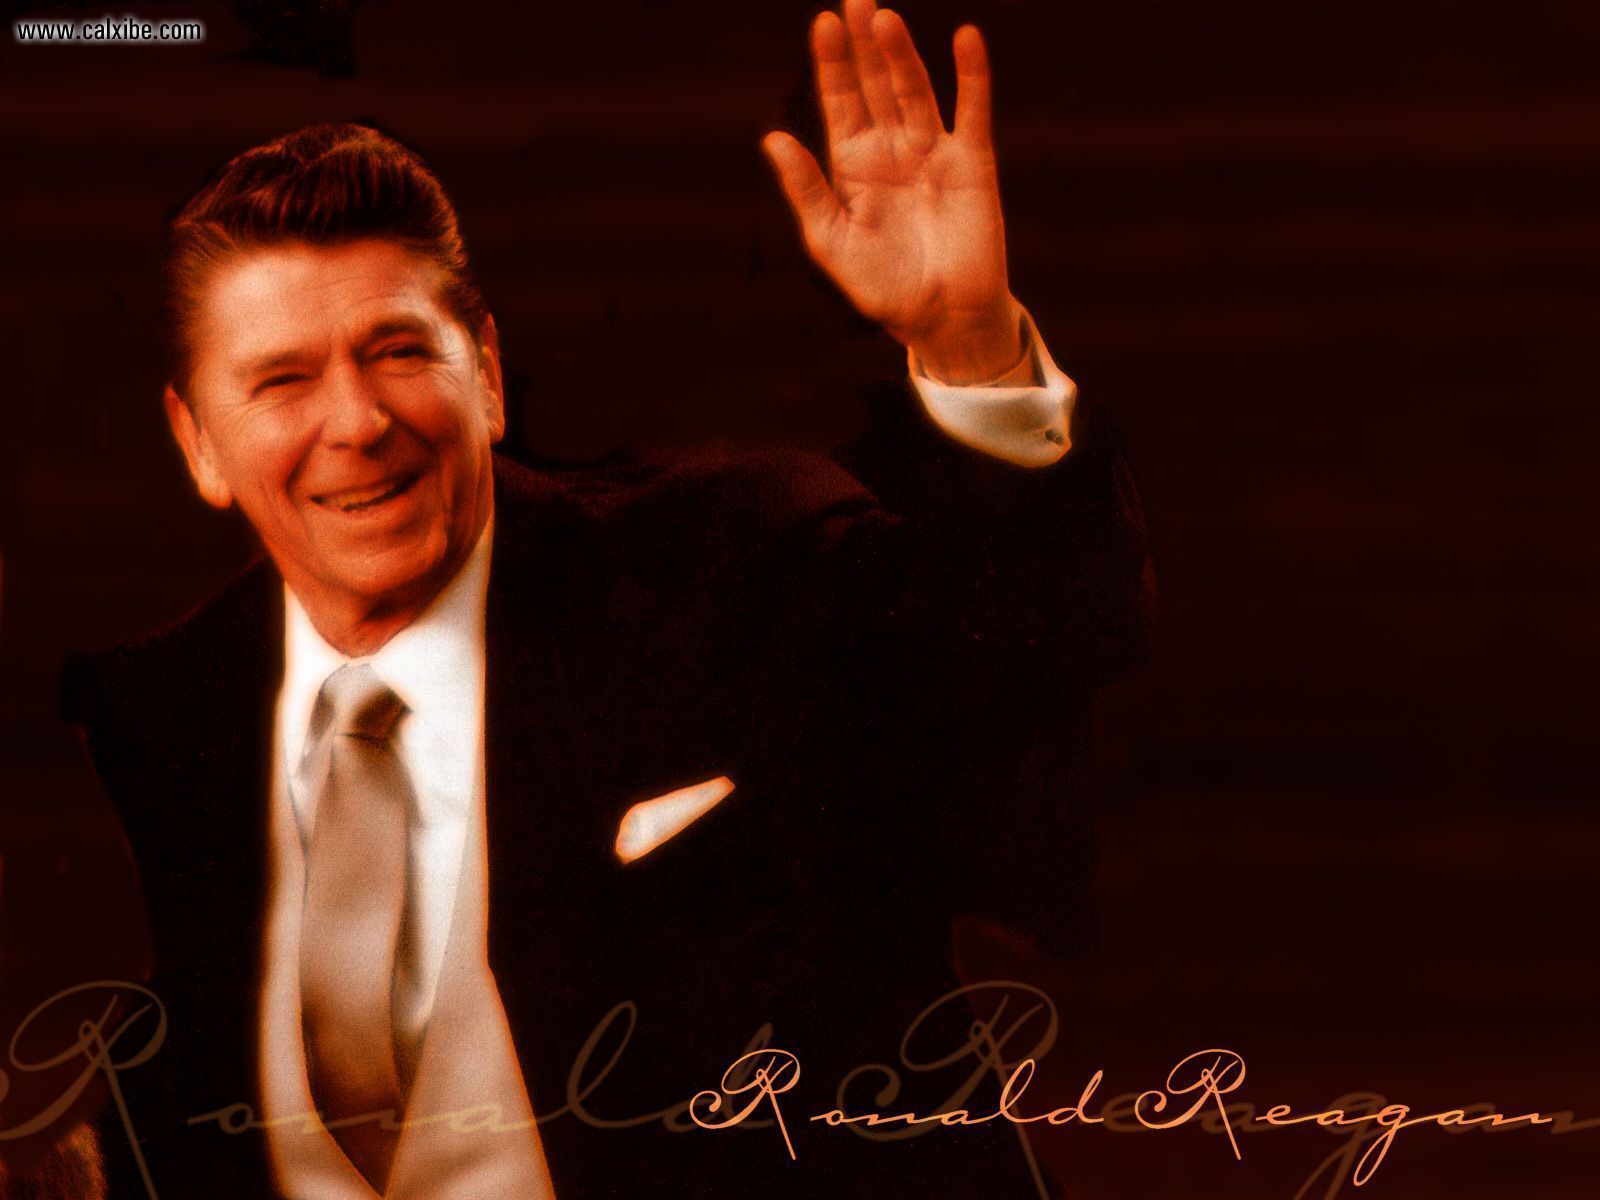 Male Celebrities: Ronald Reagan, picture nr. 12707